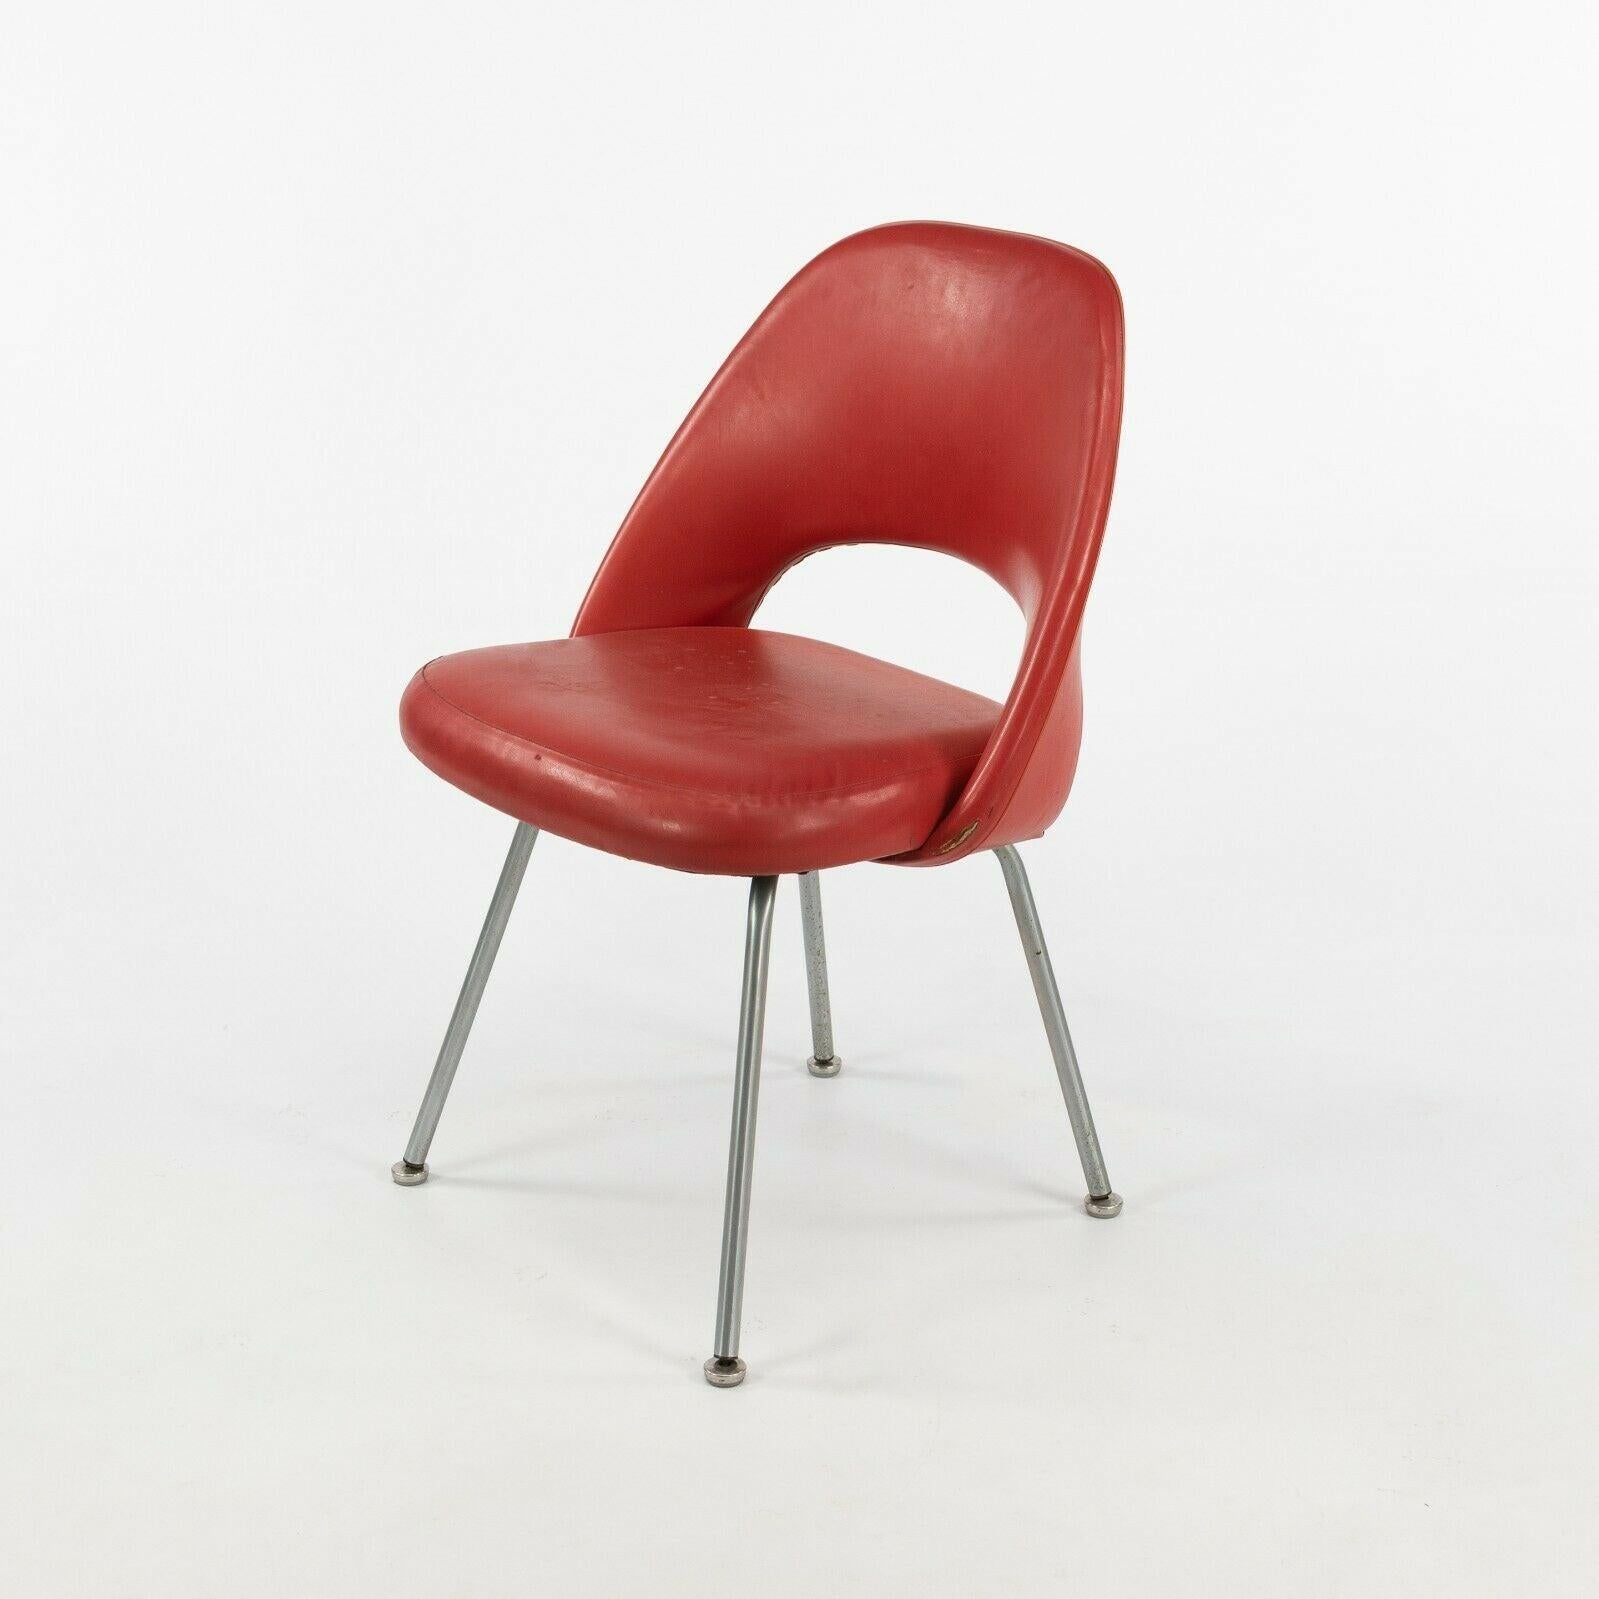 American 1963 Pair of Eero Saarinen for Knoll Red Vinyl Armless Executive Dining Chairs For Sale